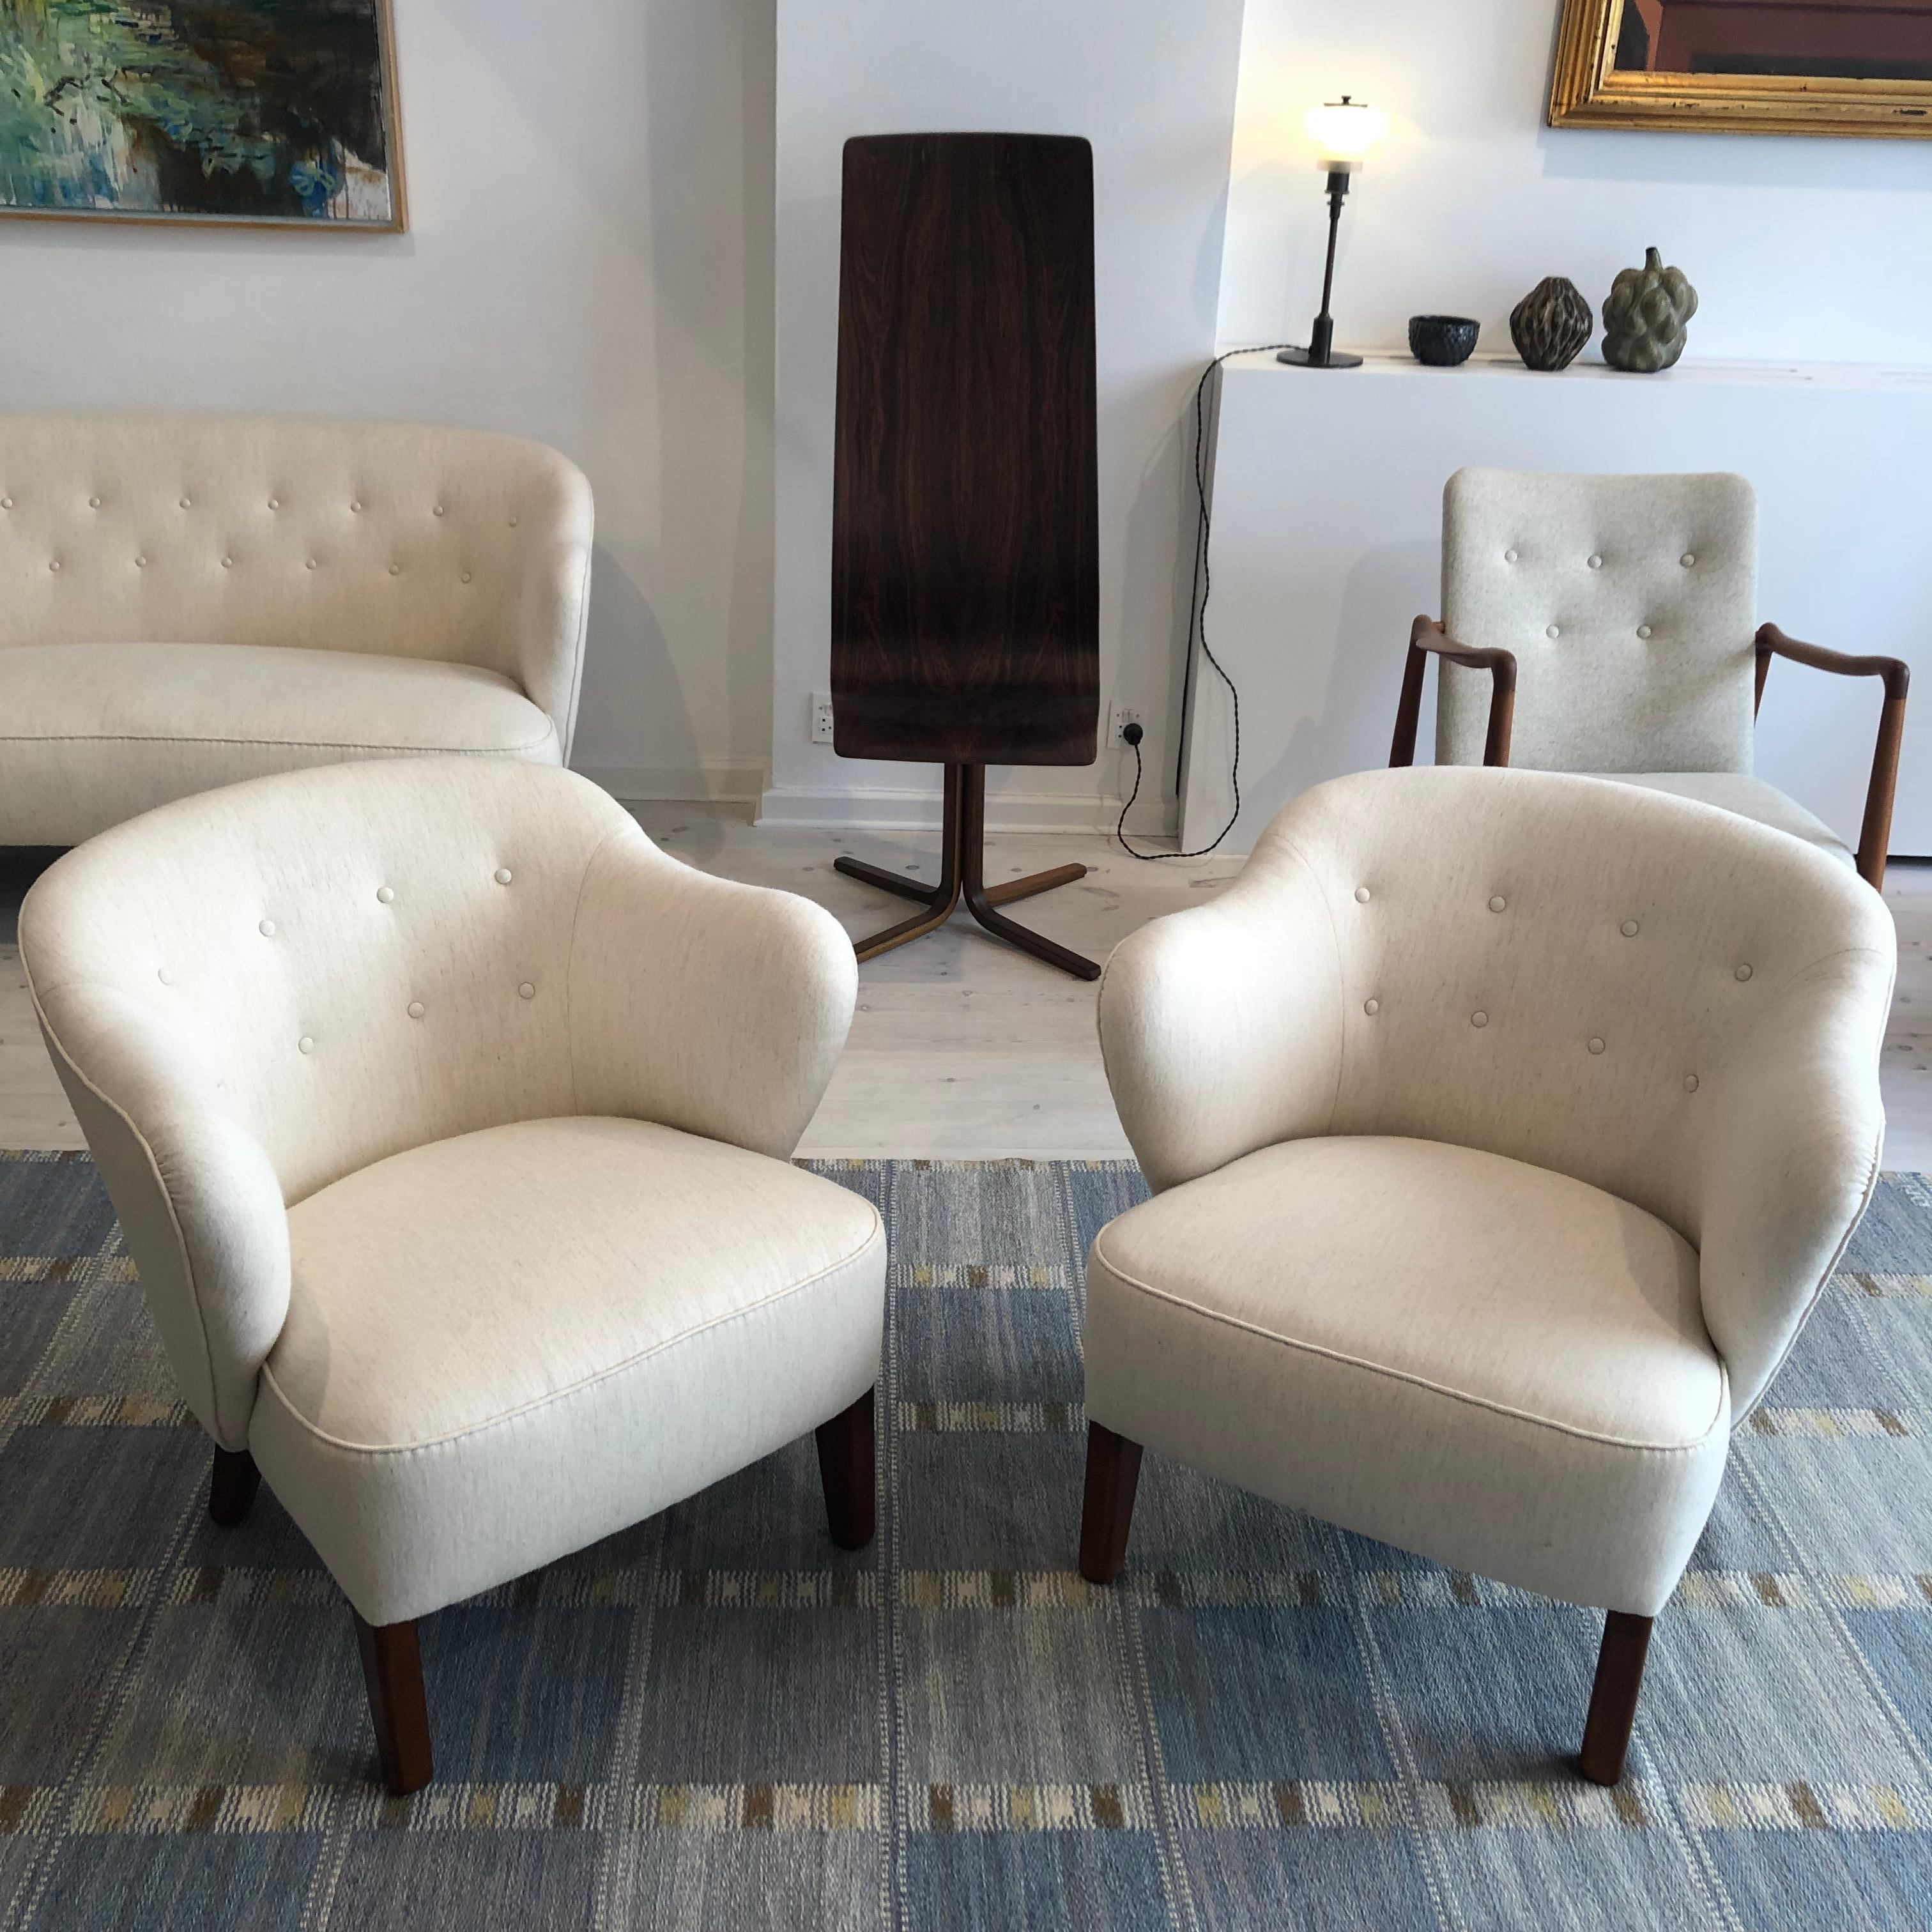 Flemming Lassen Pair of Easy Chairs in White Fabric, 1940s In Excellent Condition For Sale In Copenhagen, DK